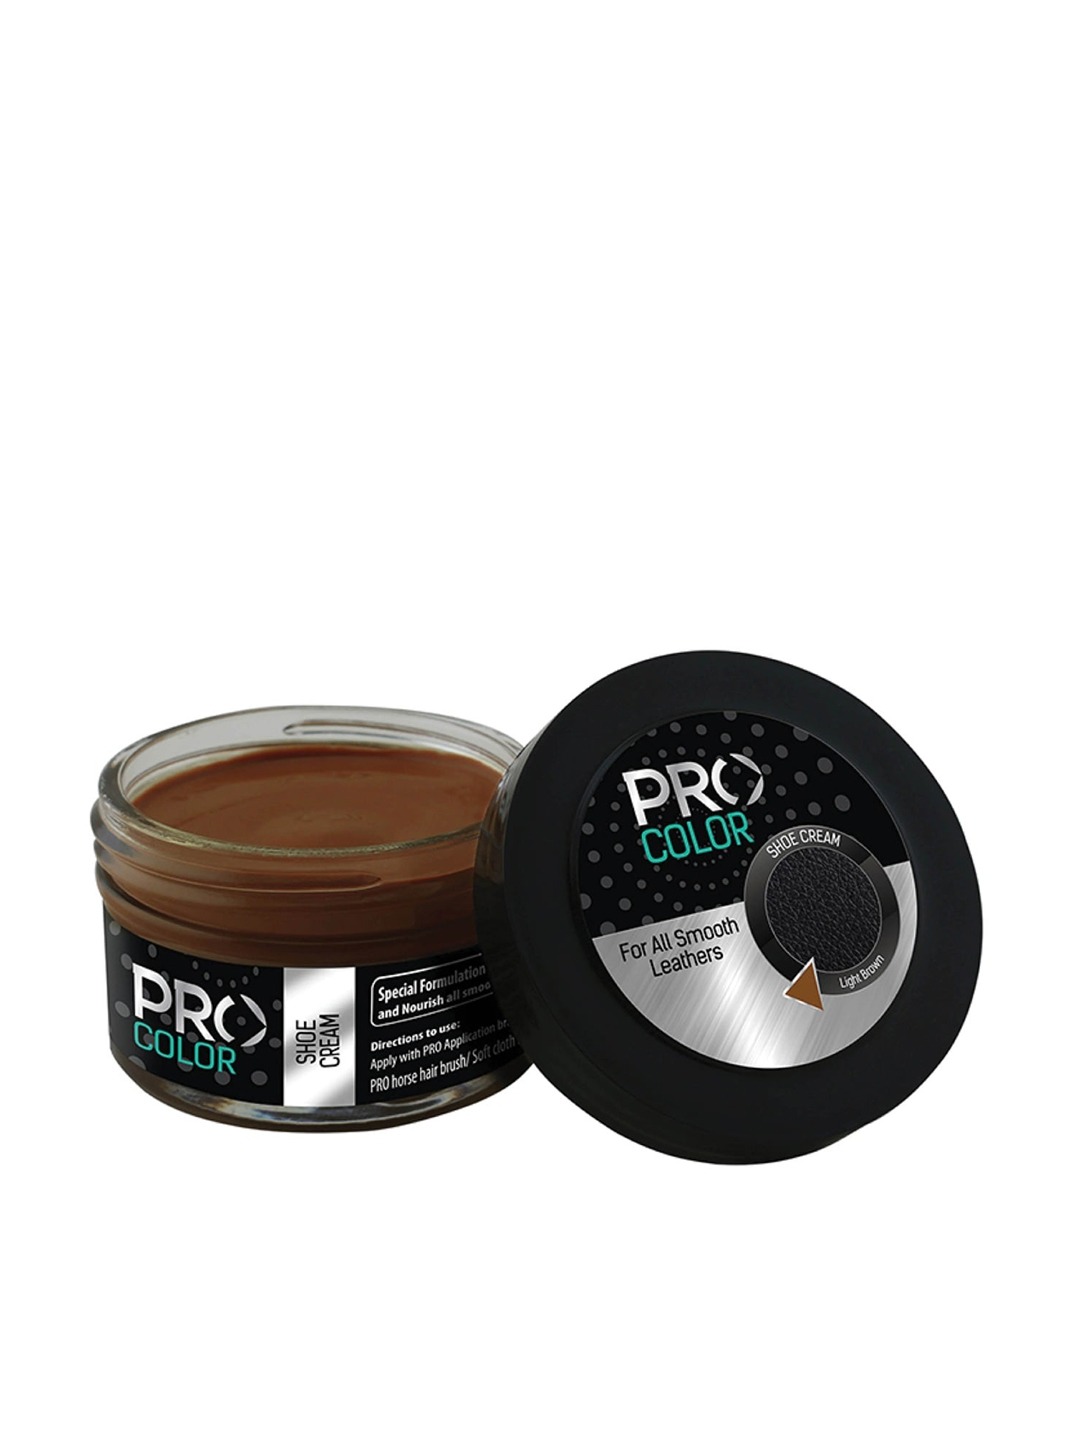 PRO Brown Smooth Leather Shoe Cream